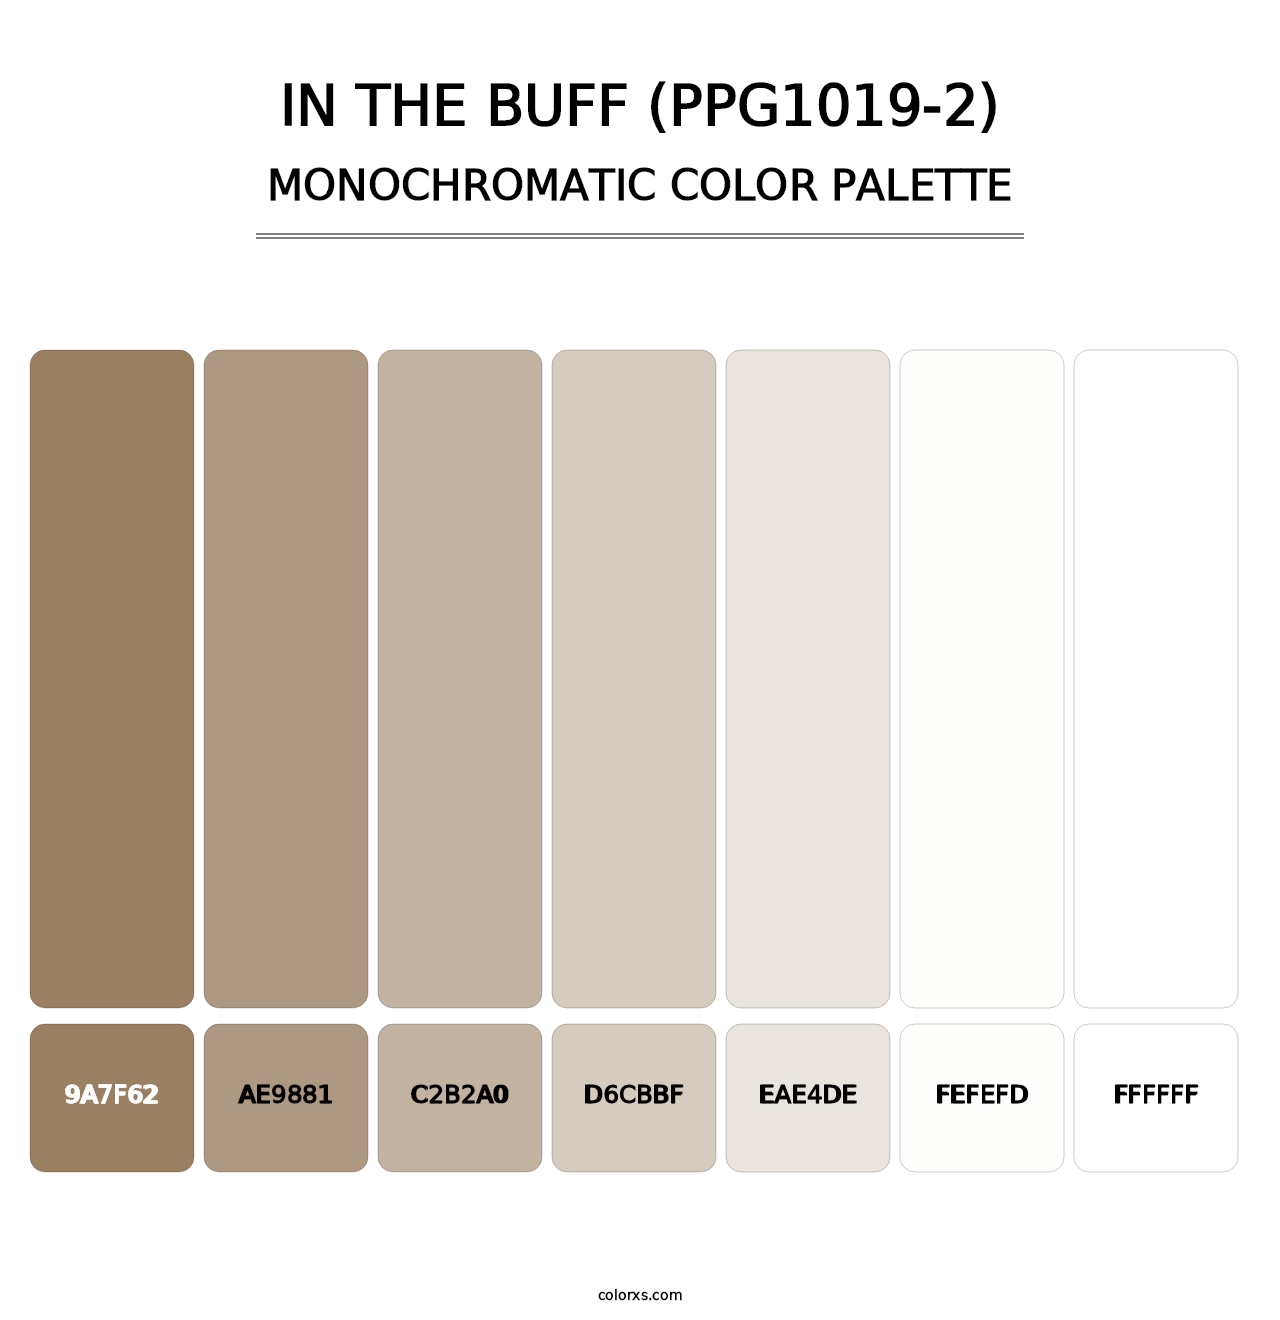 In The Buff (PPG1019-2) - Monochromatic Color Palette